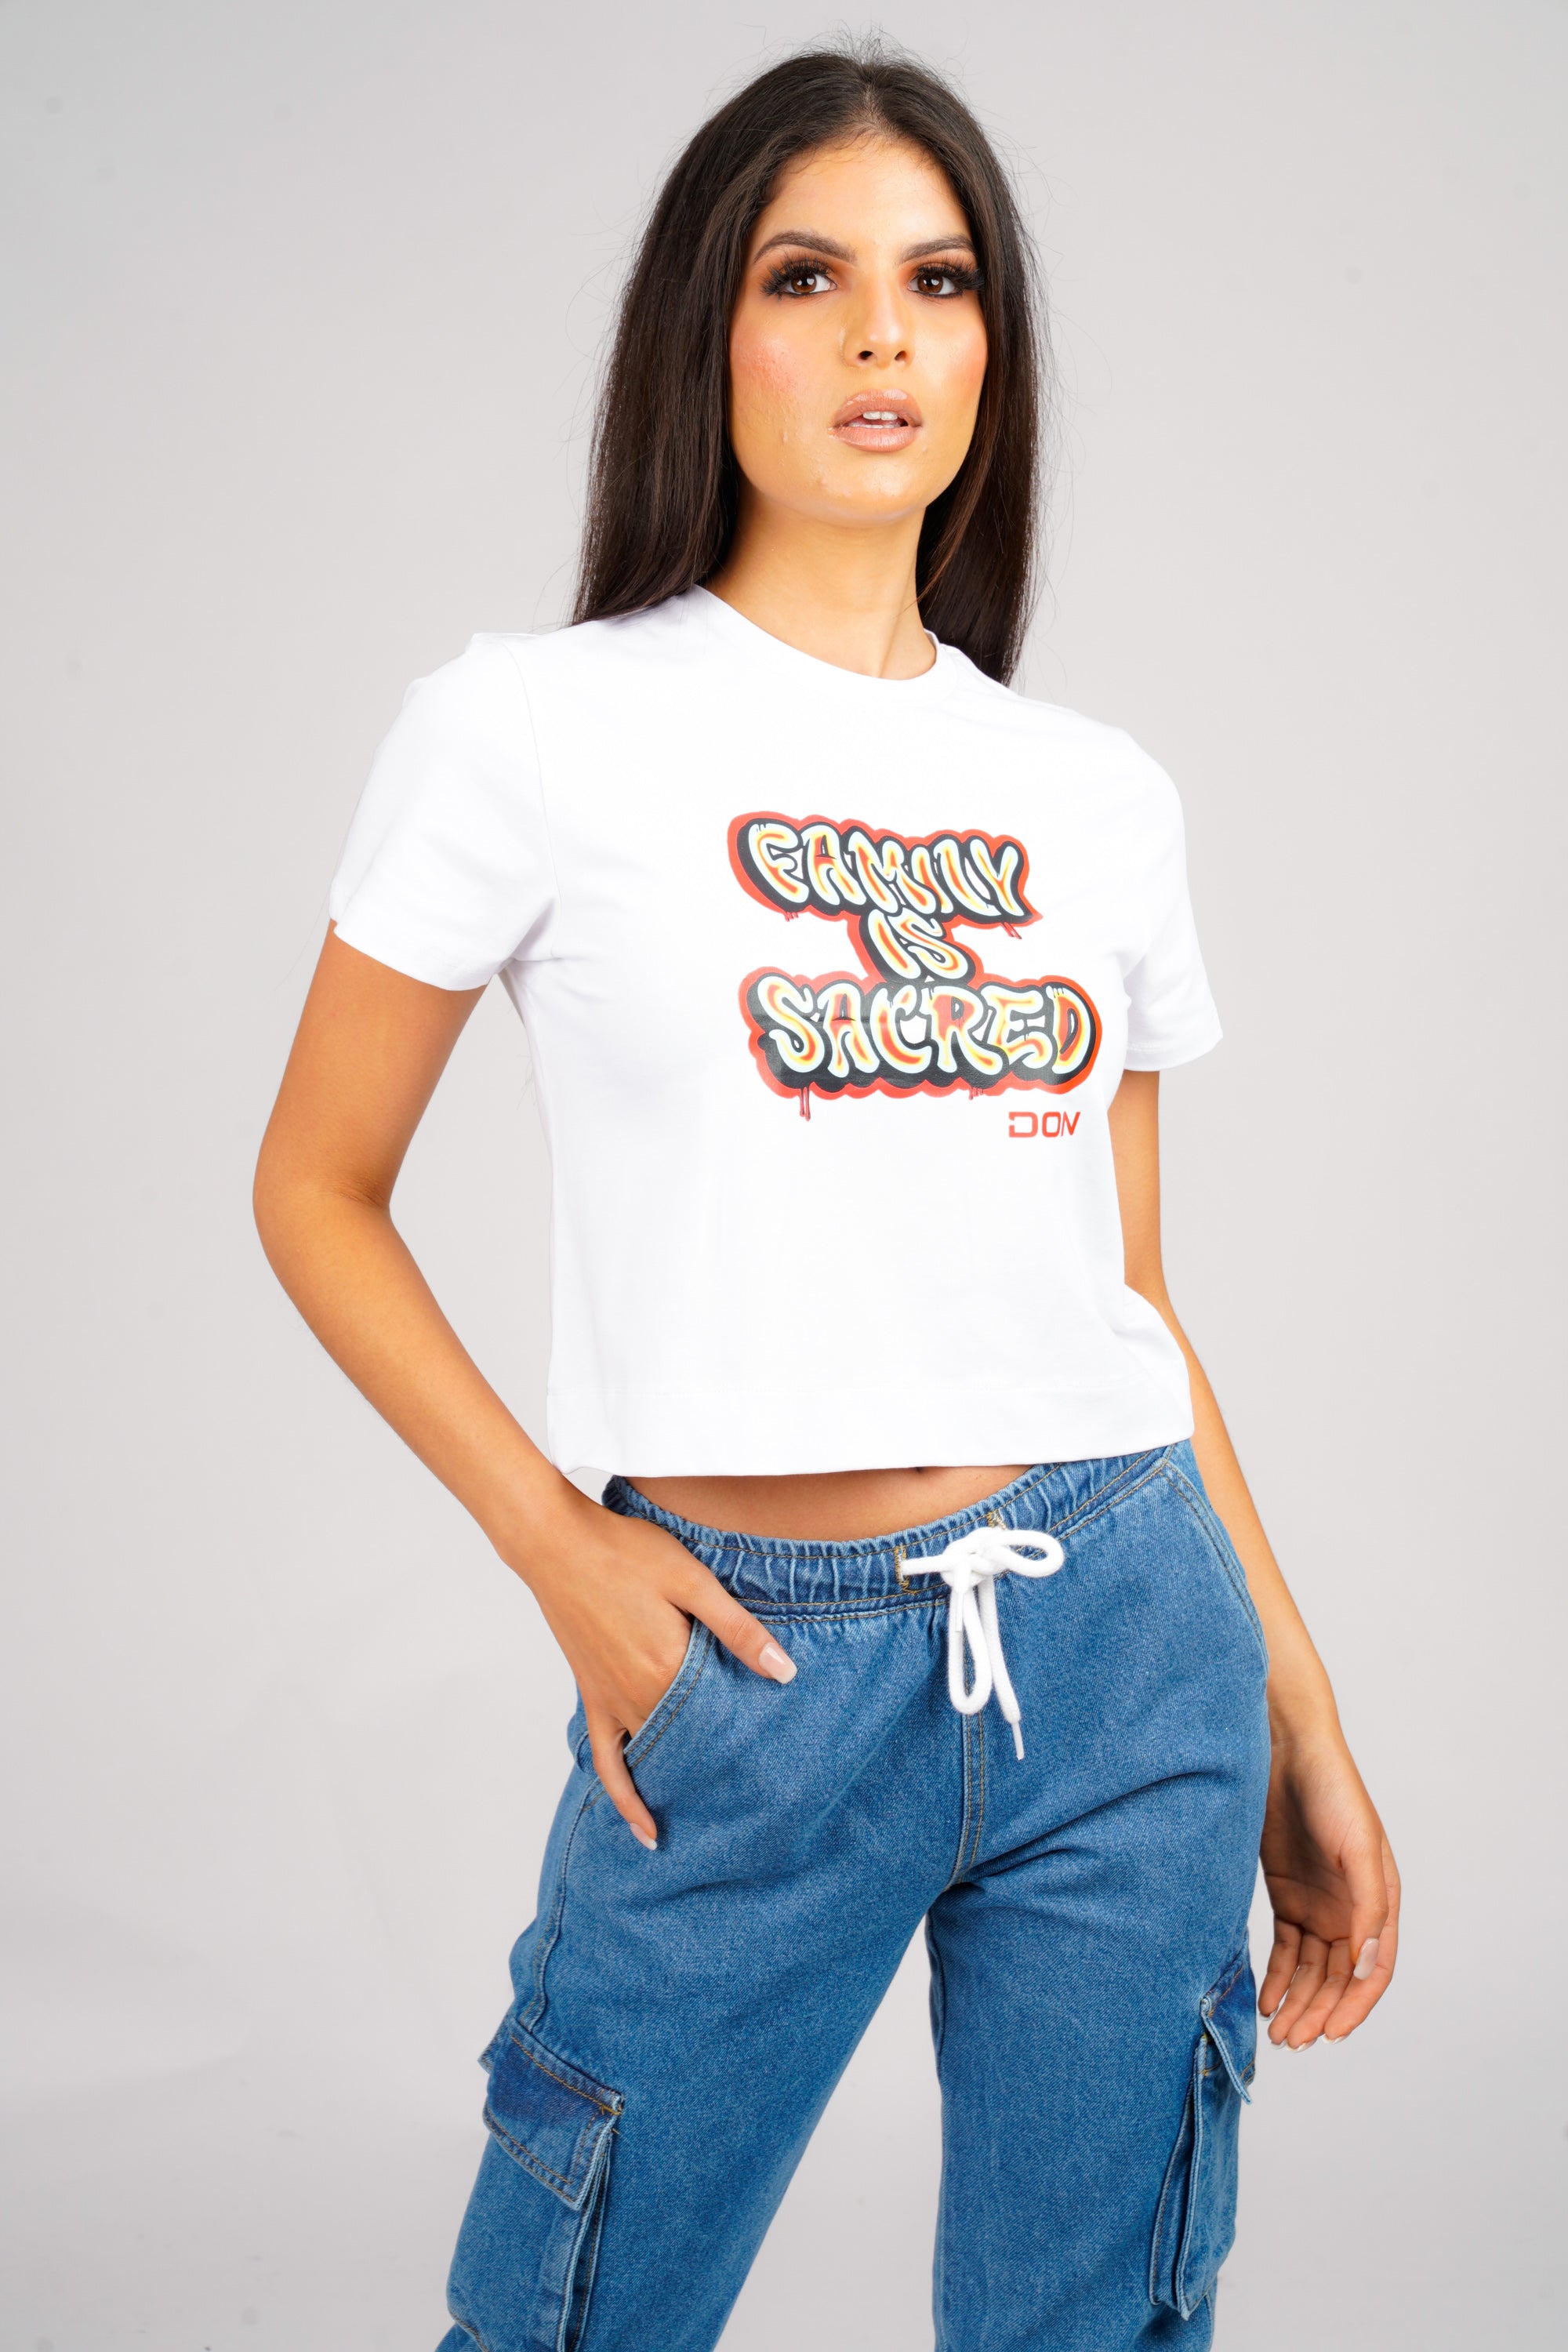 DON FAMILY IS SACRED WHITE CROPPED T-SHIRT